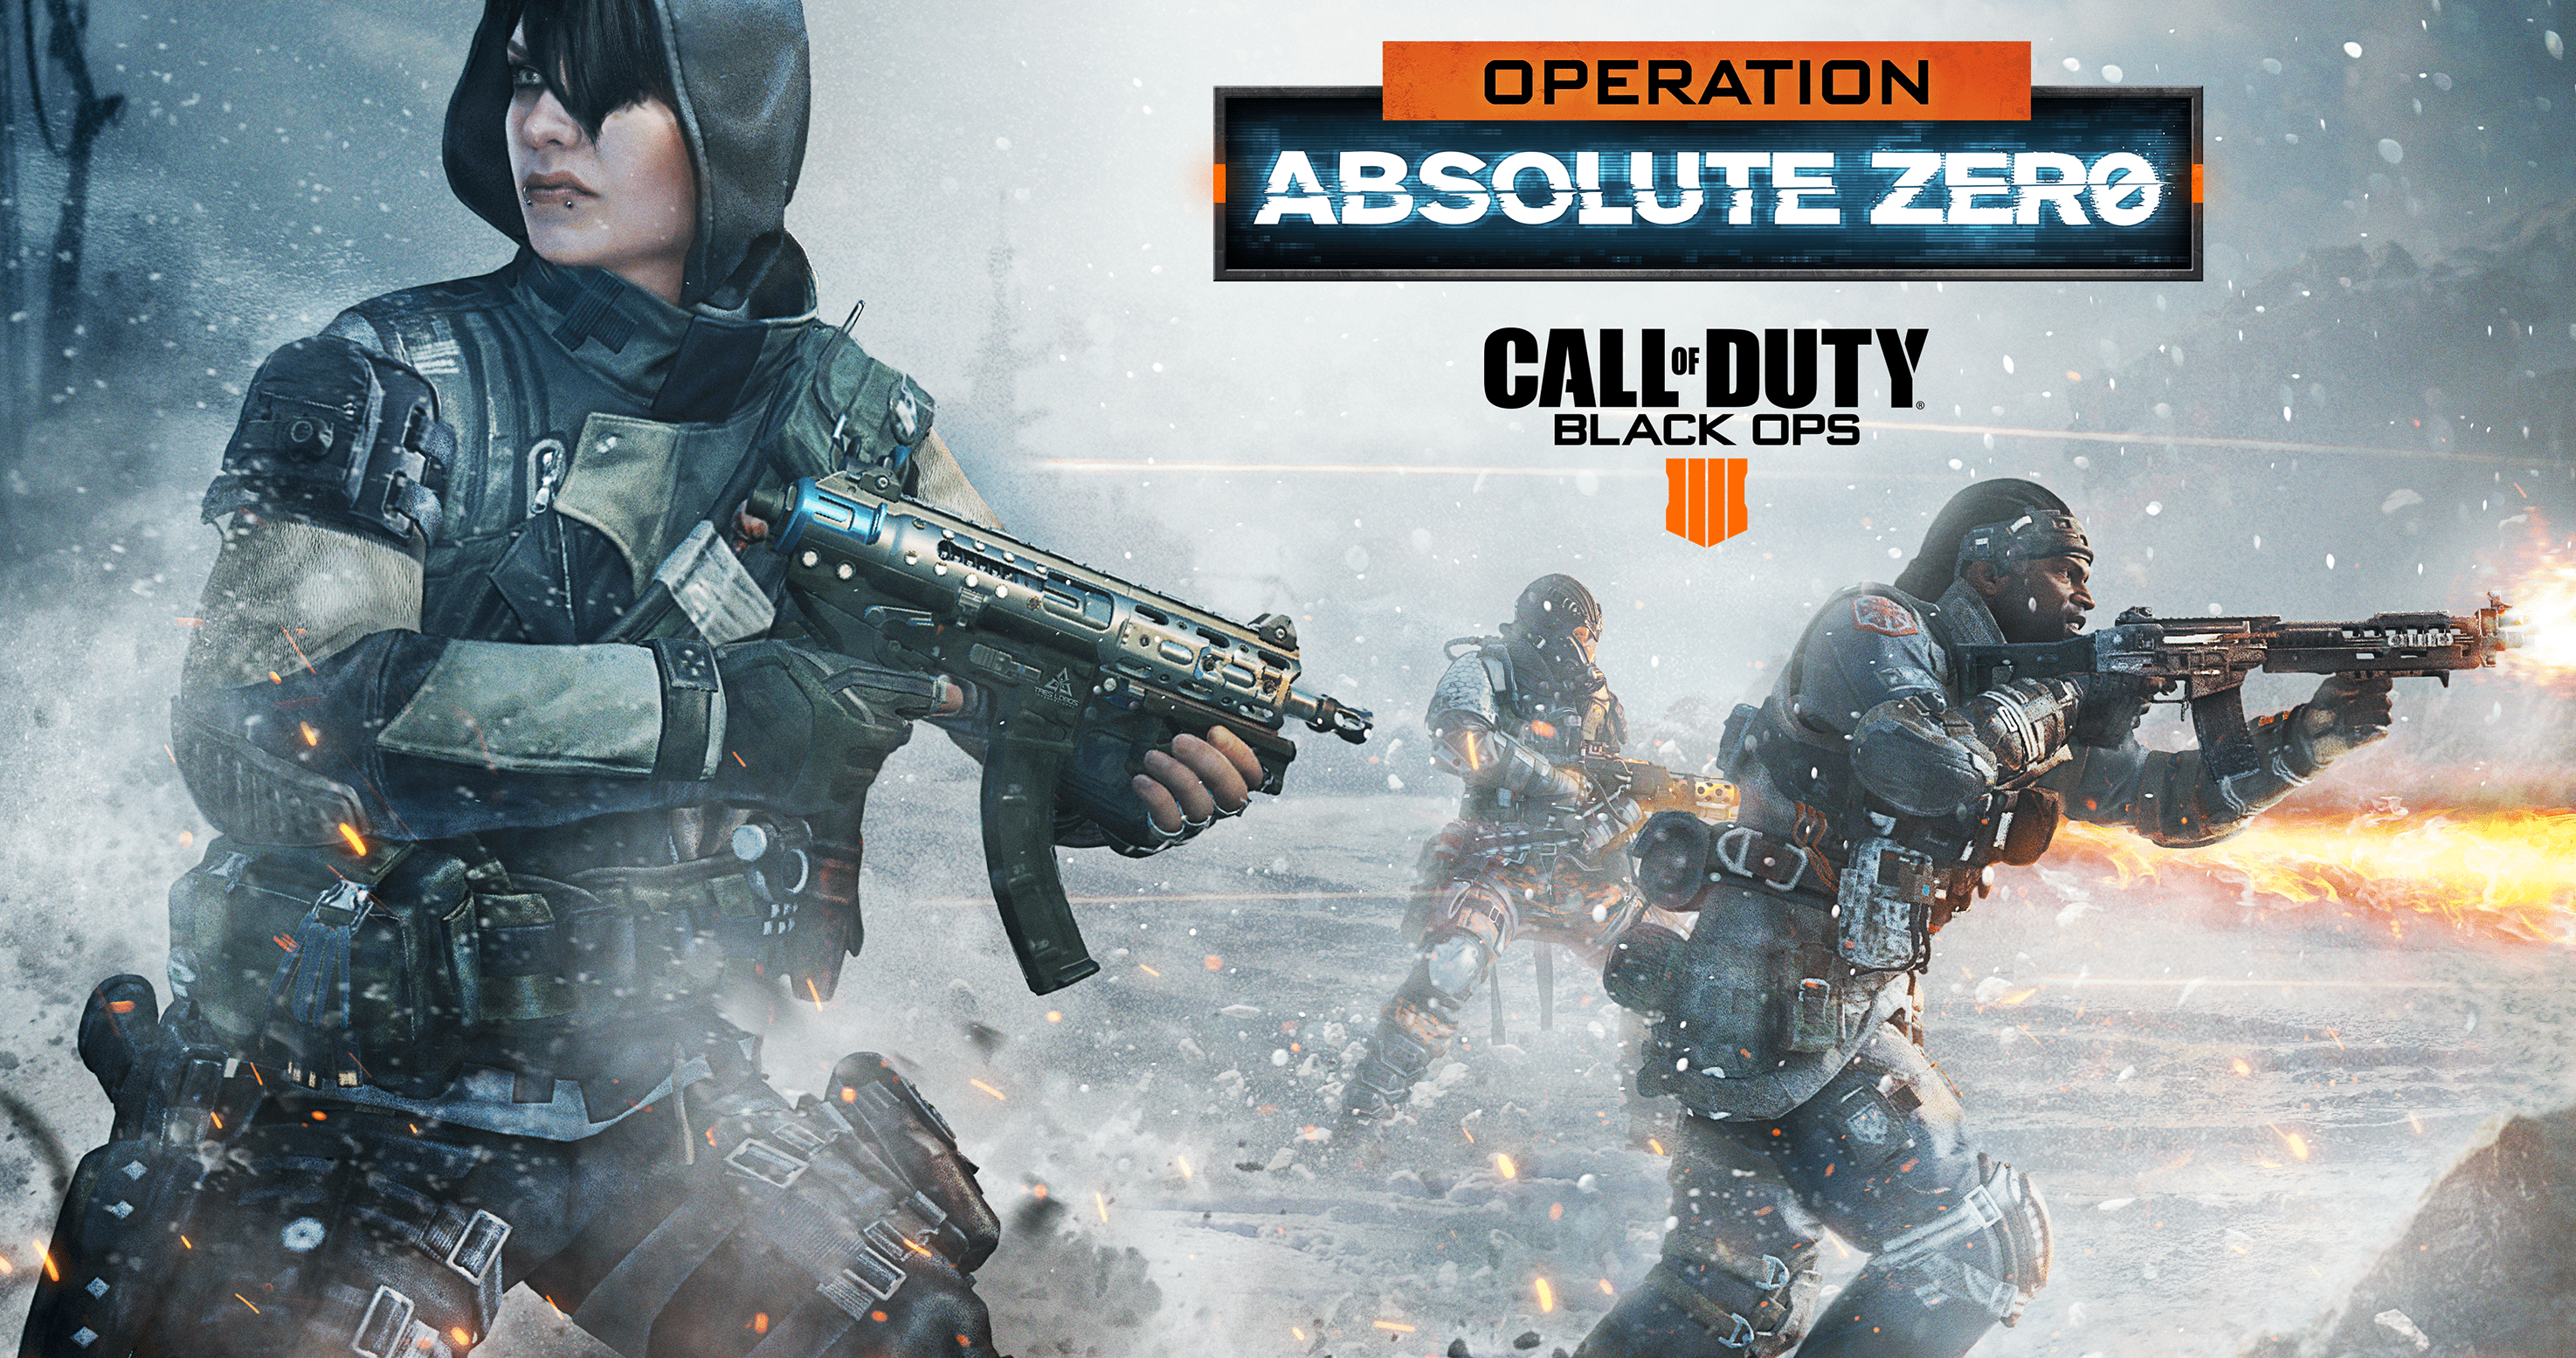 Call of Duty Black Ops 4 Operation Absolute Zero